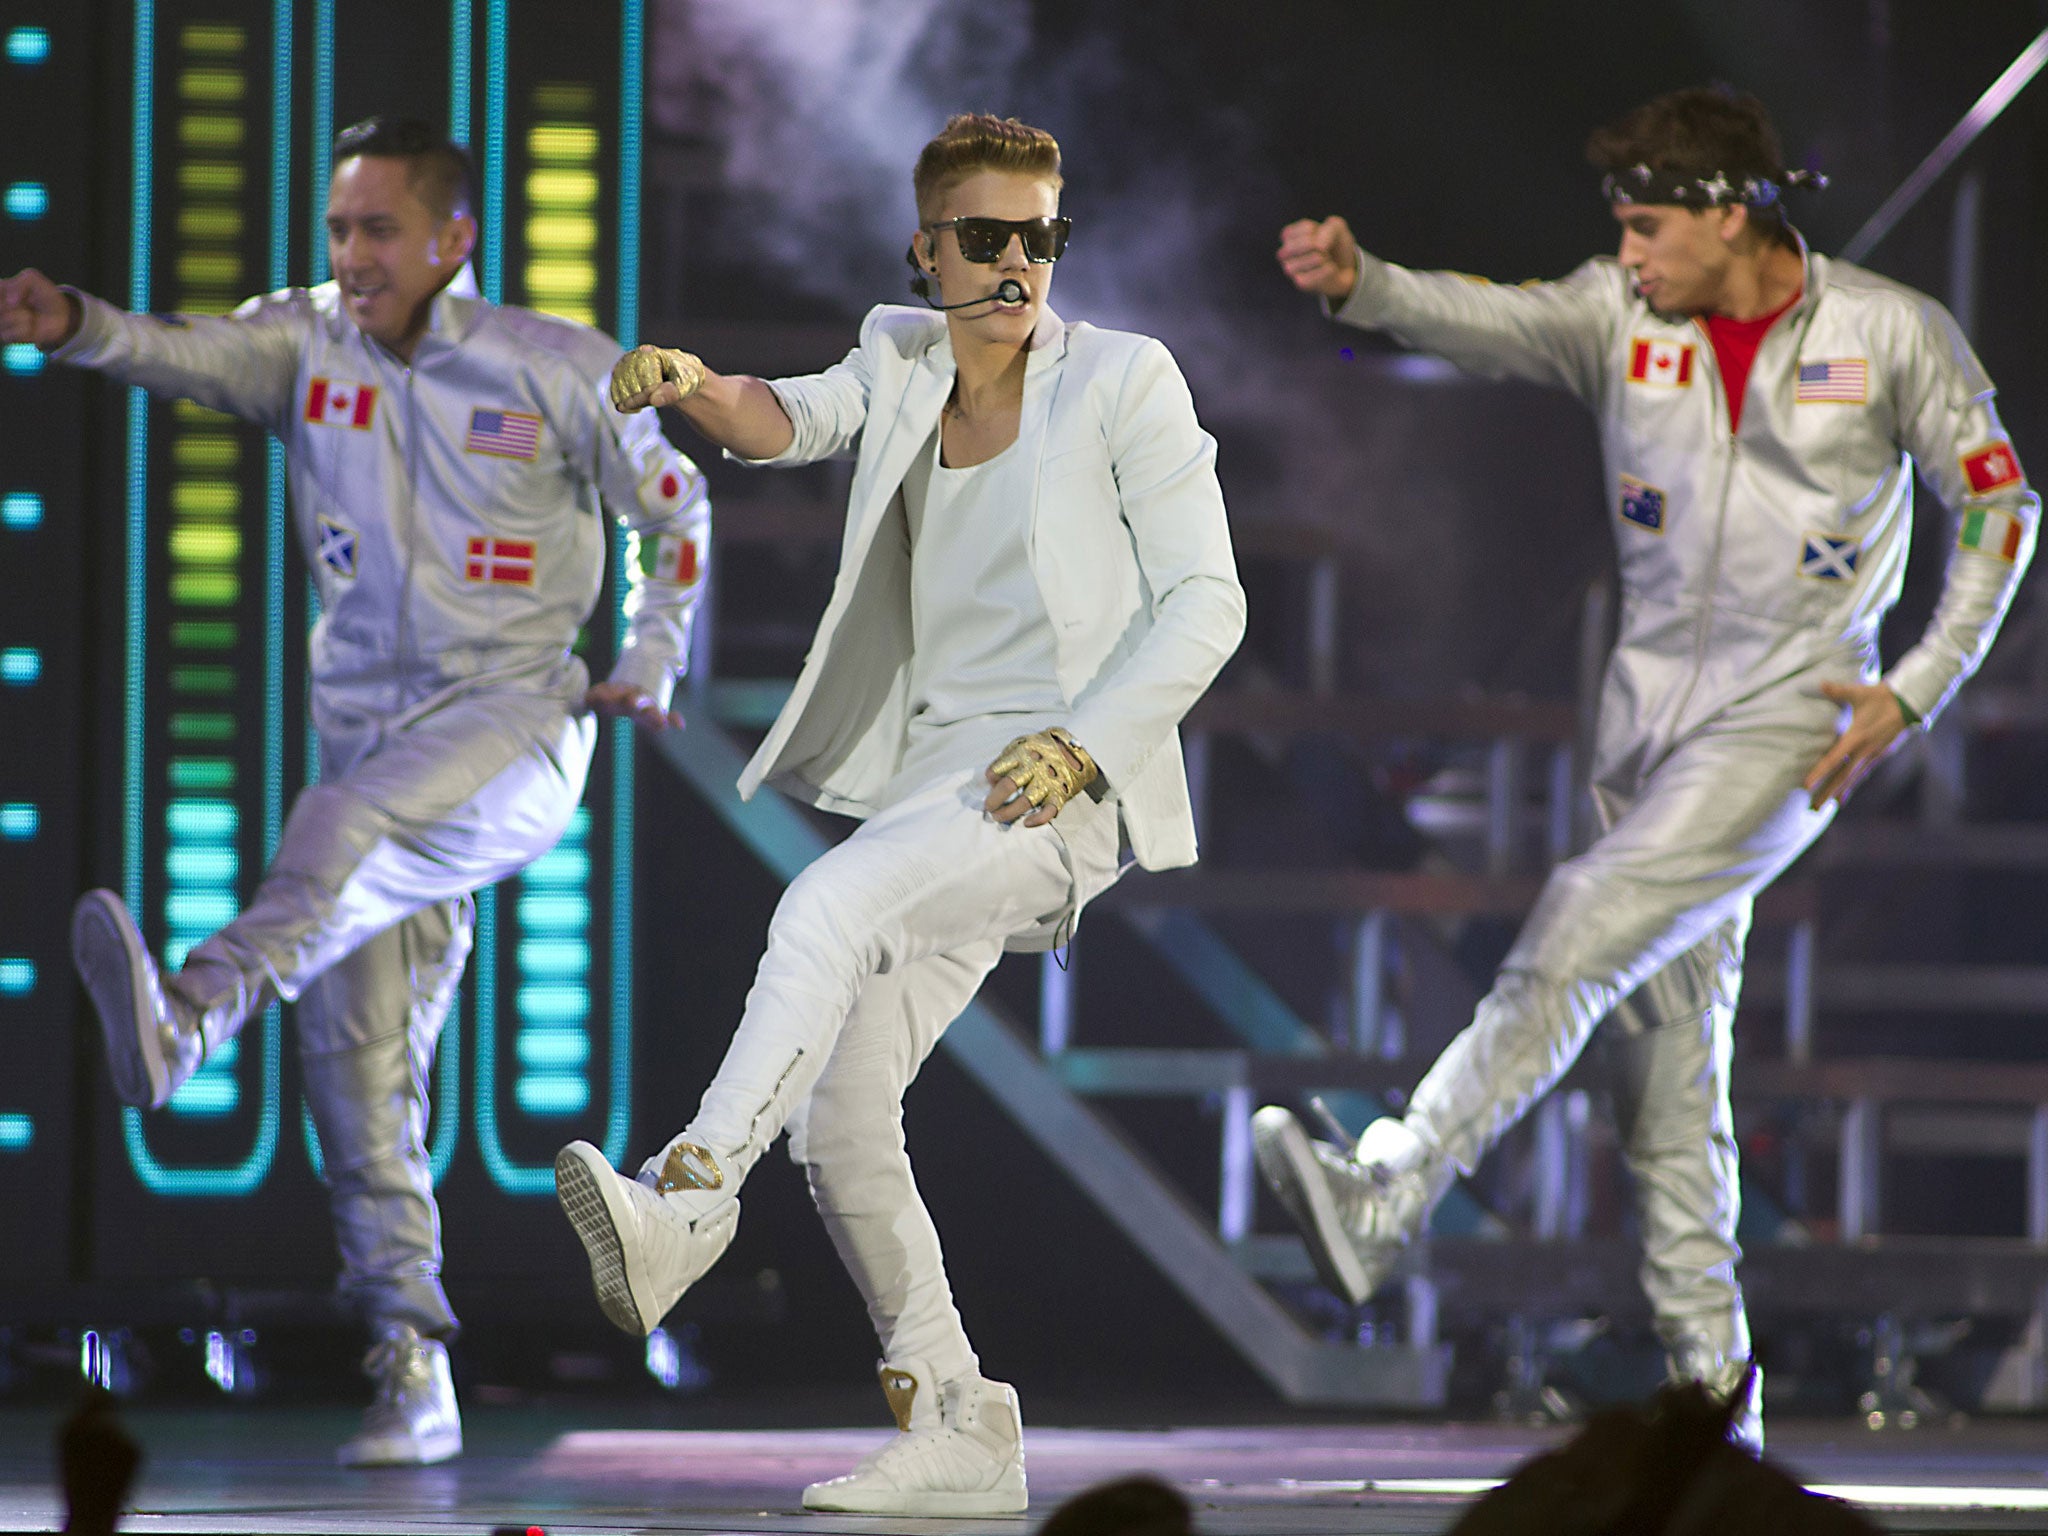 Canadian singer Justin Bieber performs during a concert at The GelreDome Stadium in Arnhem on April 13, 2013.